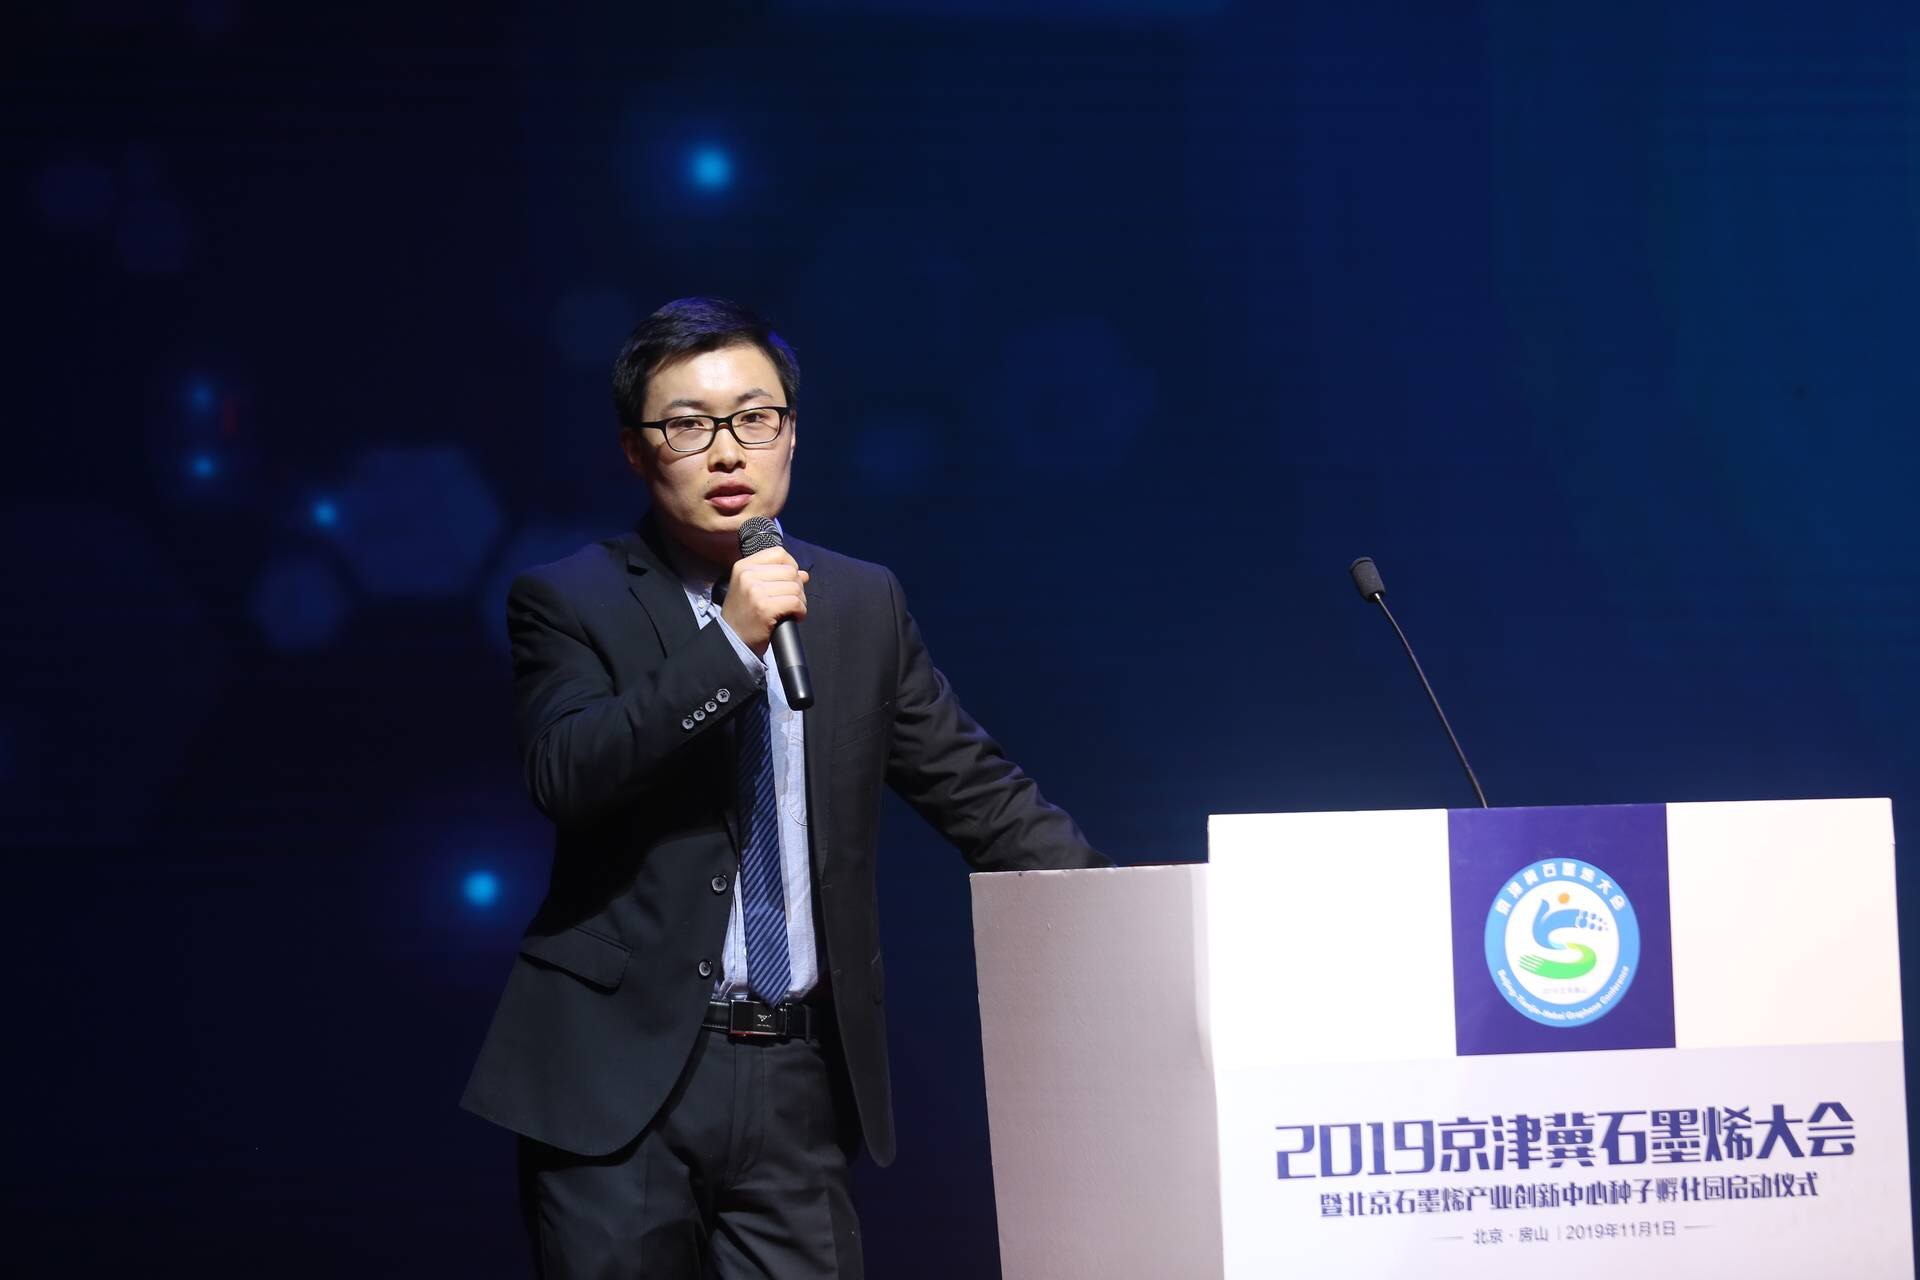 Matrass was invited to 2019 graphene conference in Beijing-Tianjin-Hebei region 